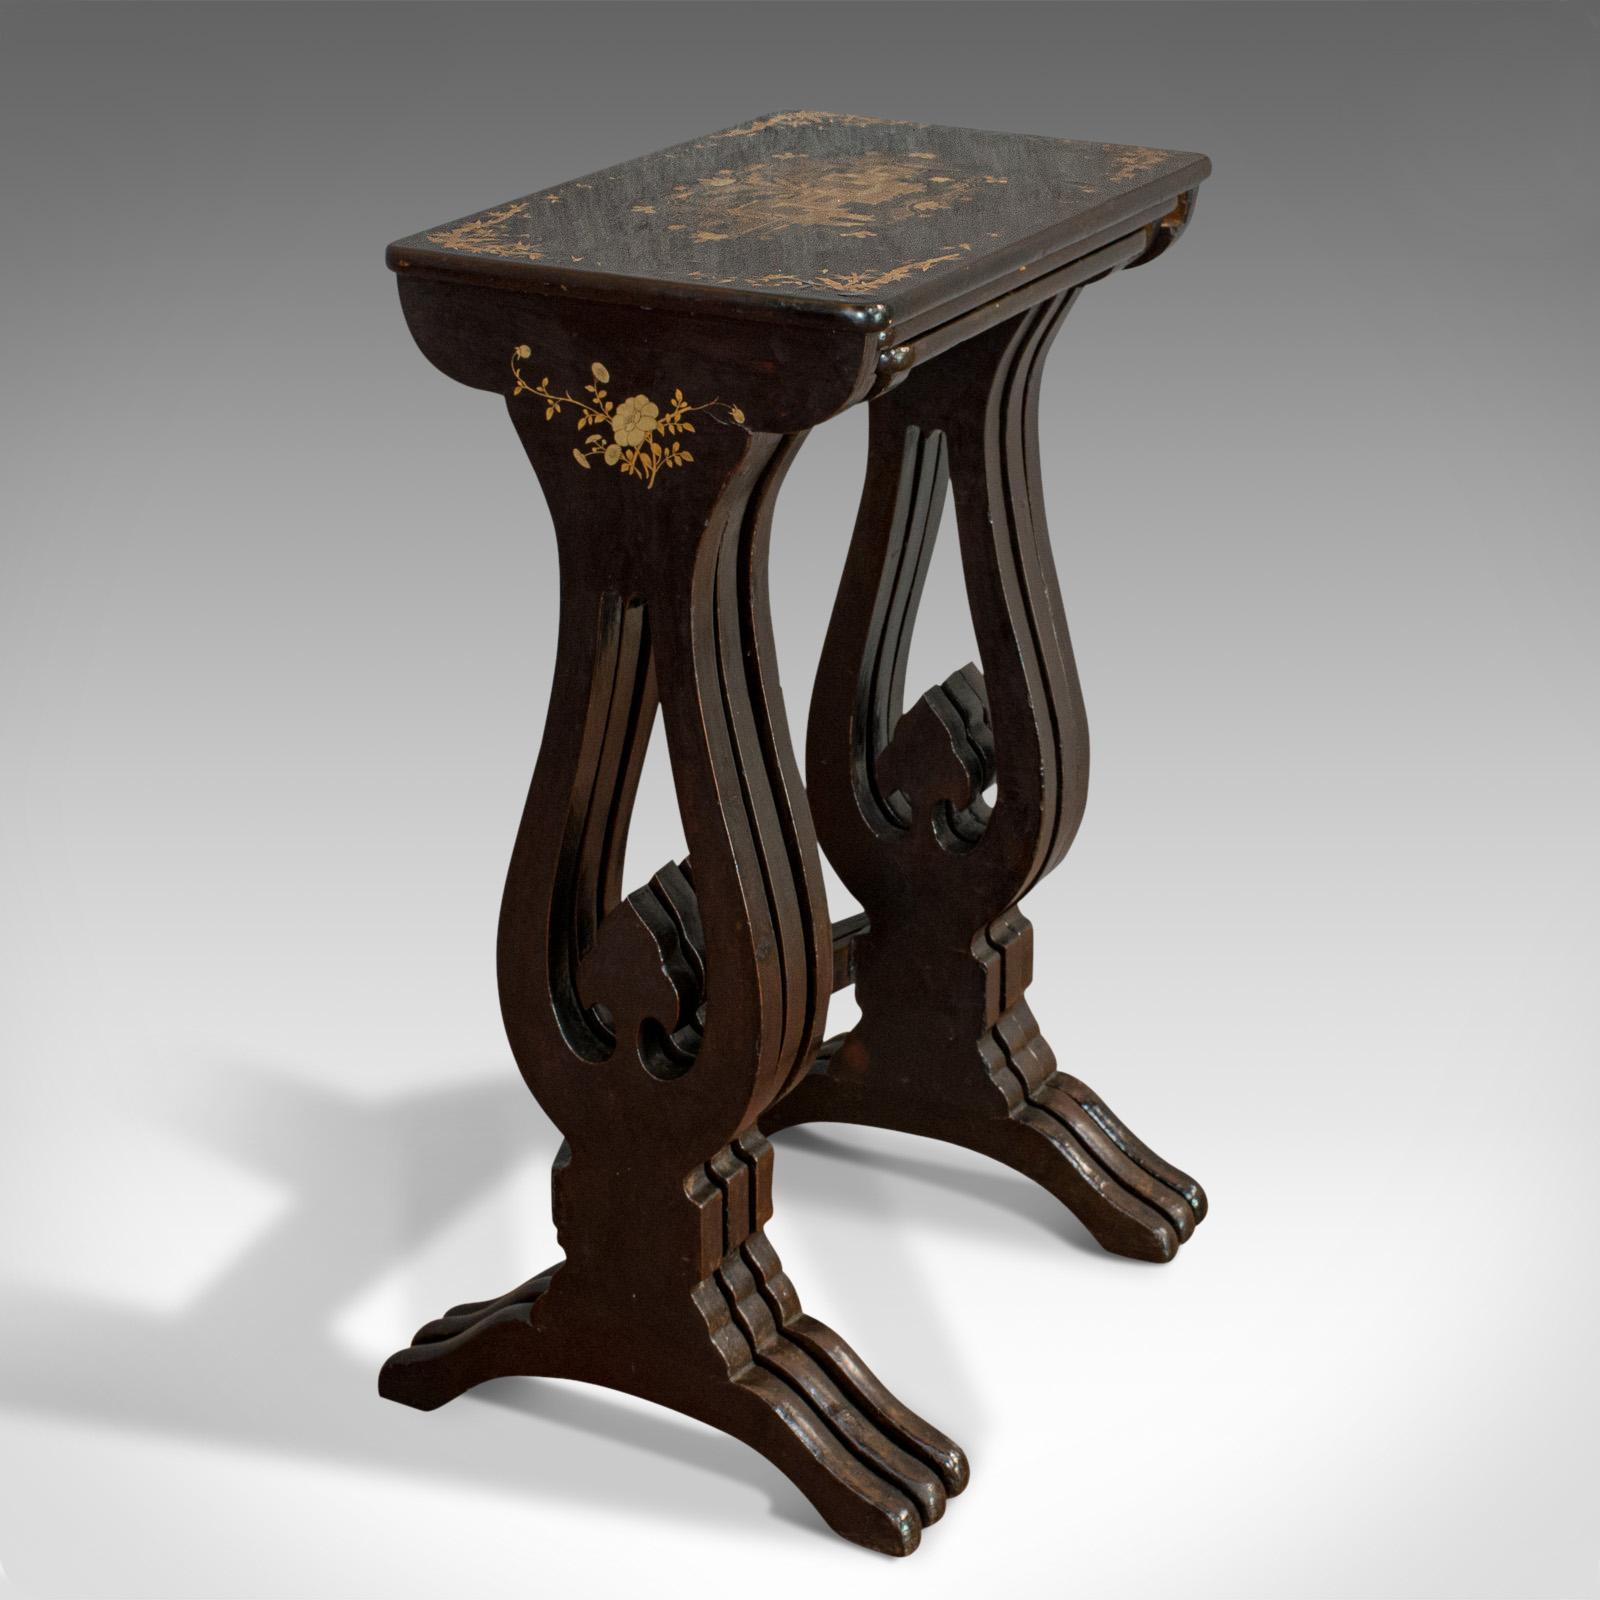 This is an antique nest of three occasional tables. An oriental, ebonized trio in typically Japanned taste, dating to the Victorian period, circa 1880.

Ebonized with gilt inlay and a Japanned finish, each table is beautifully decorated with a